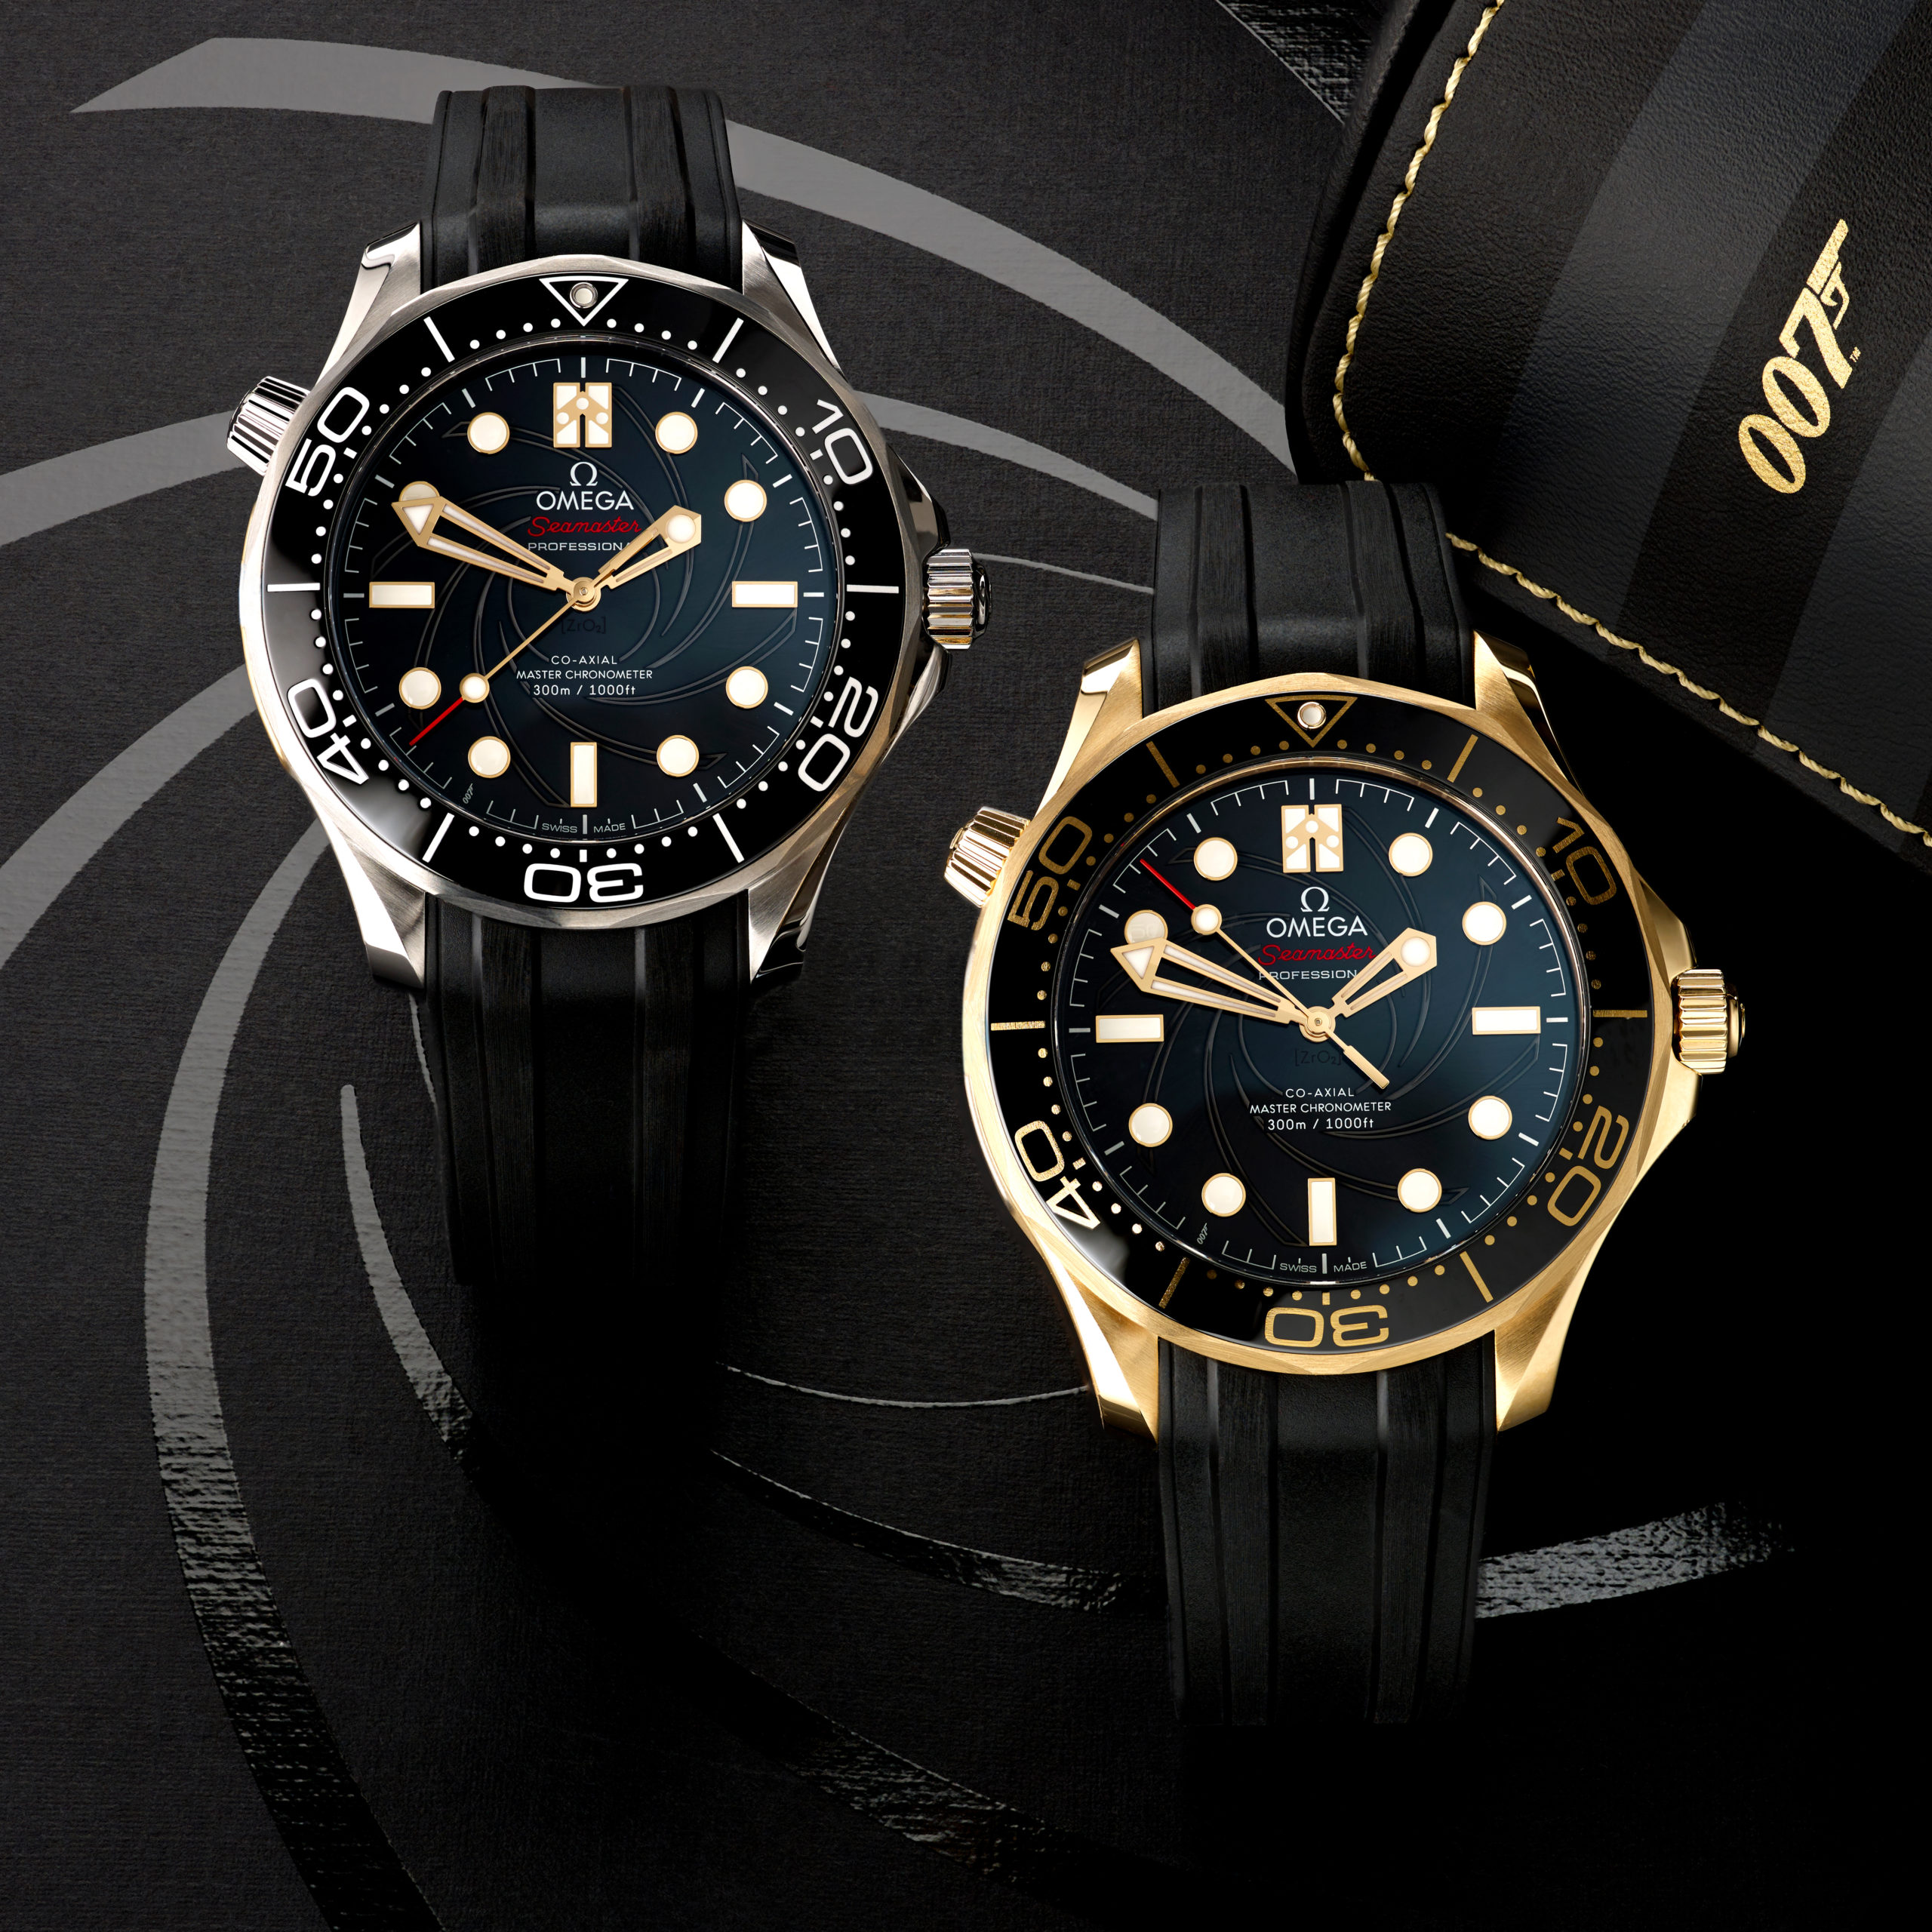 Talk to me about the Omega James Bond Limited Edition watch set...| Fellows  Blog